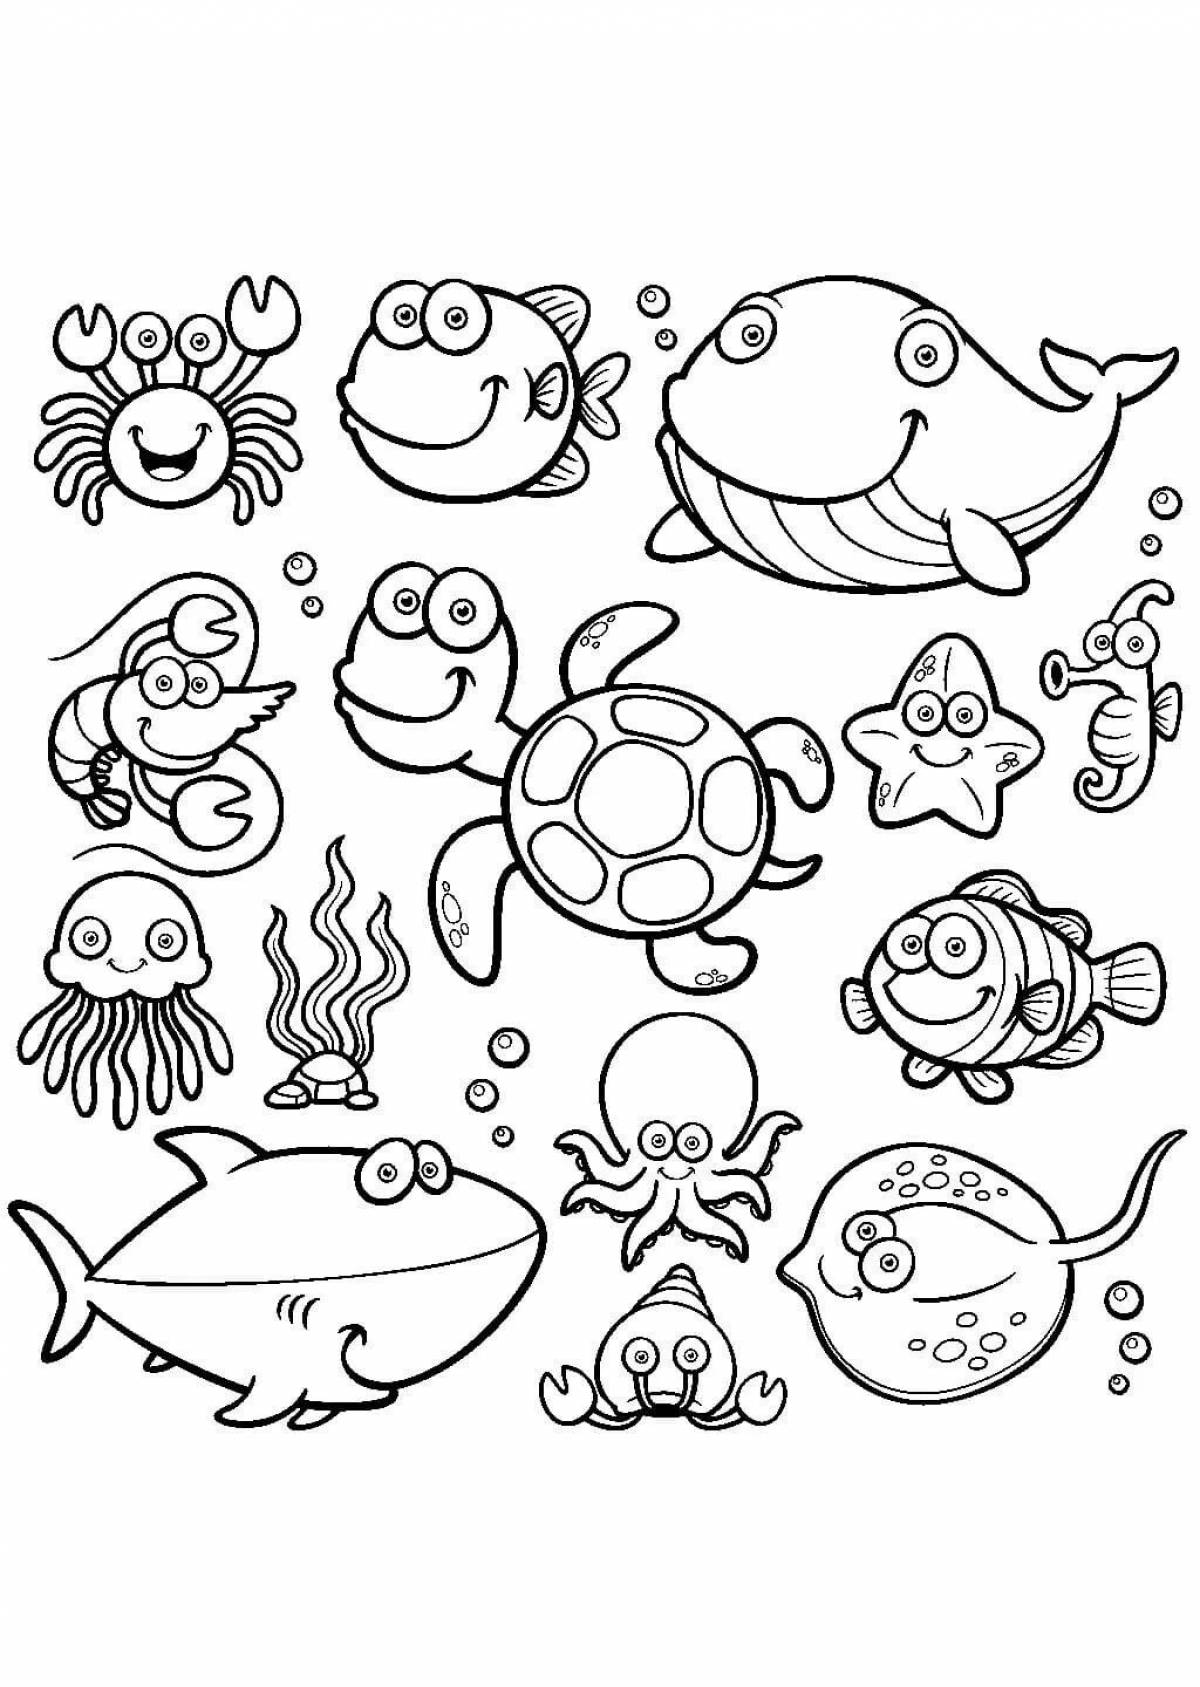 Coloured marine life coloring book for children 3-4 years old